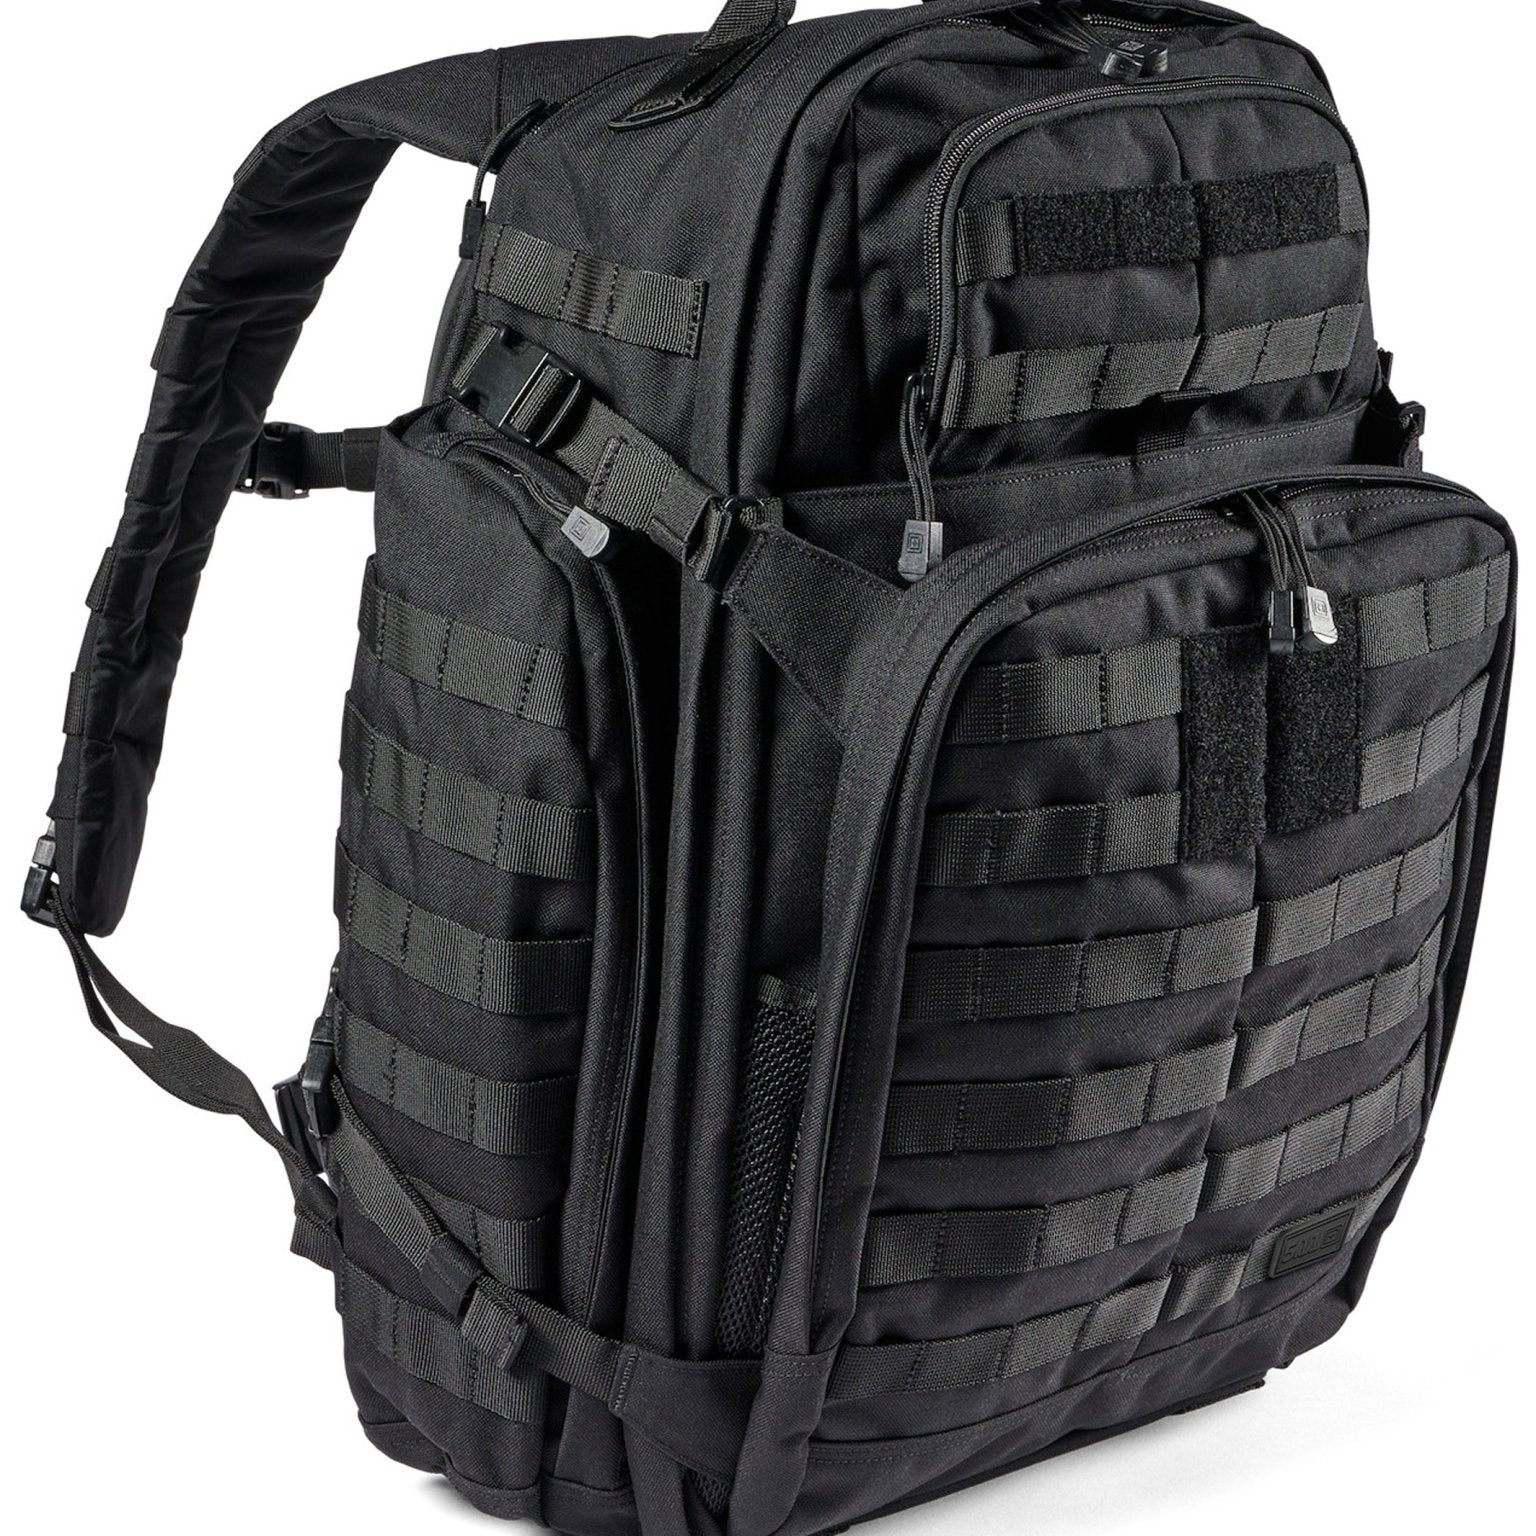 4elementsclothing5.11 Tactical5.11 Tactical - 5.11 Tactical Rush 72 2.0 Backpack - Style 56565Bag56565-019